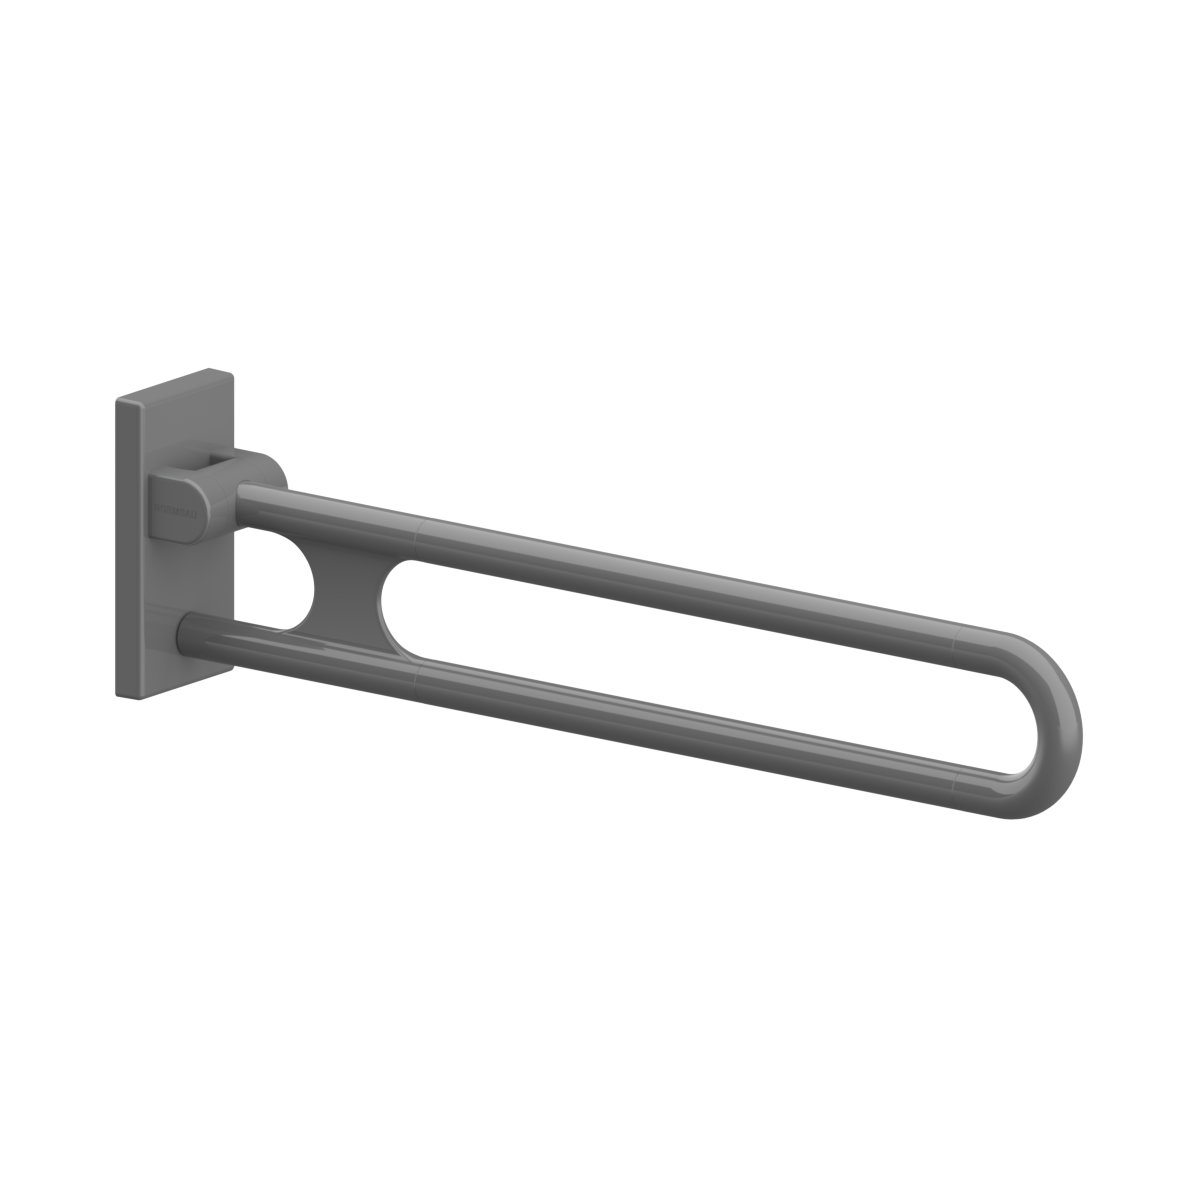 Nylon Care Lift-up support rail vario, with base plate, left and right, L = 850 mm, Dark grey